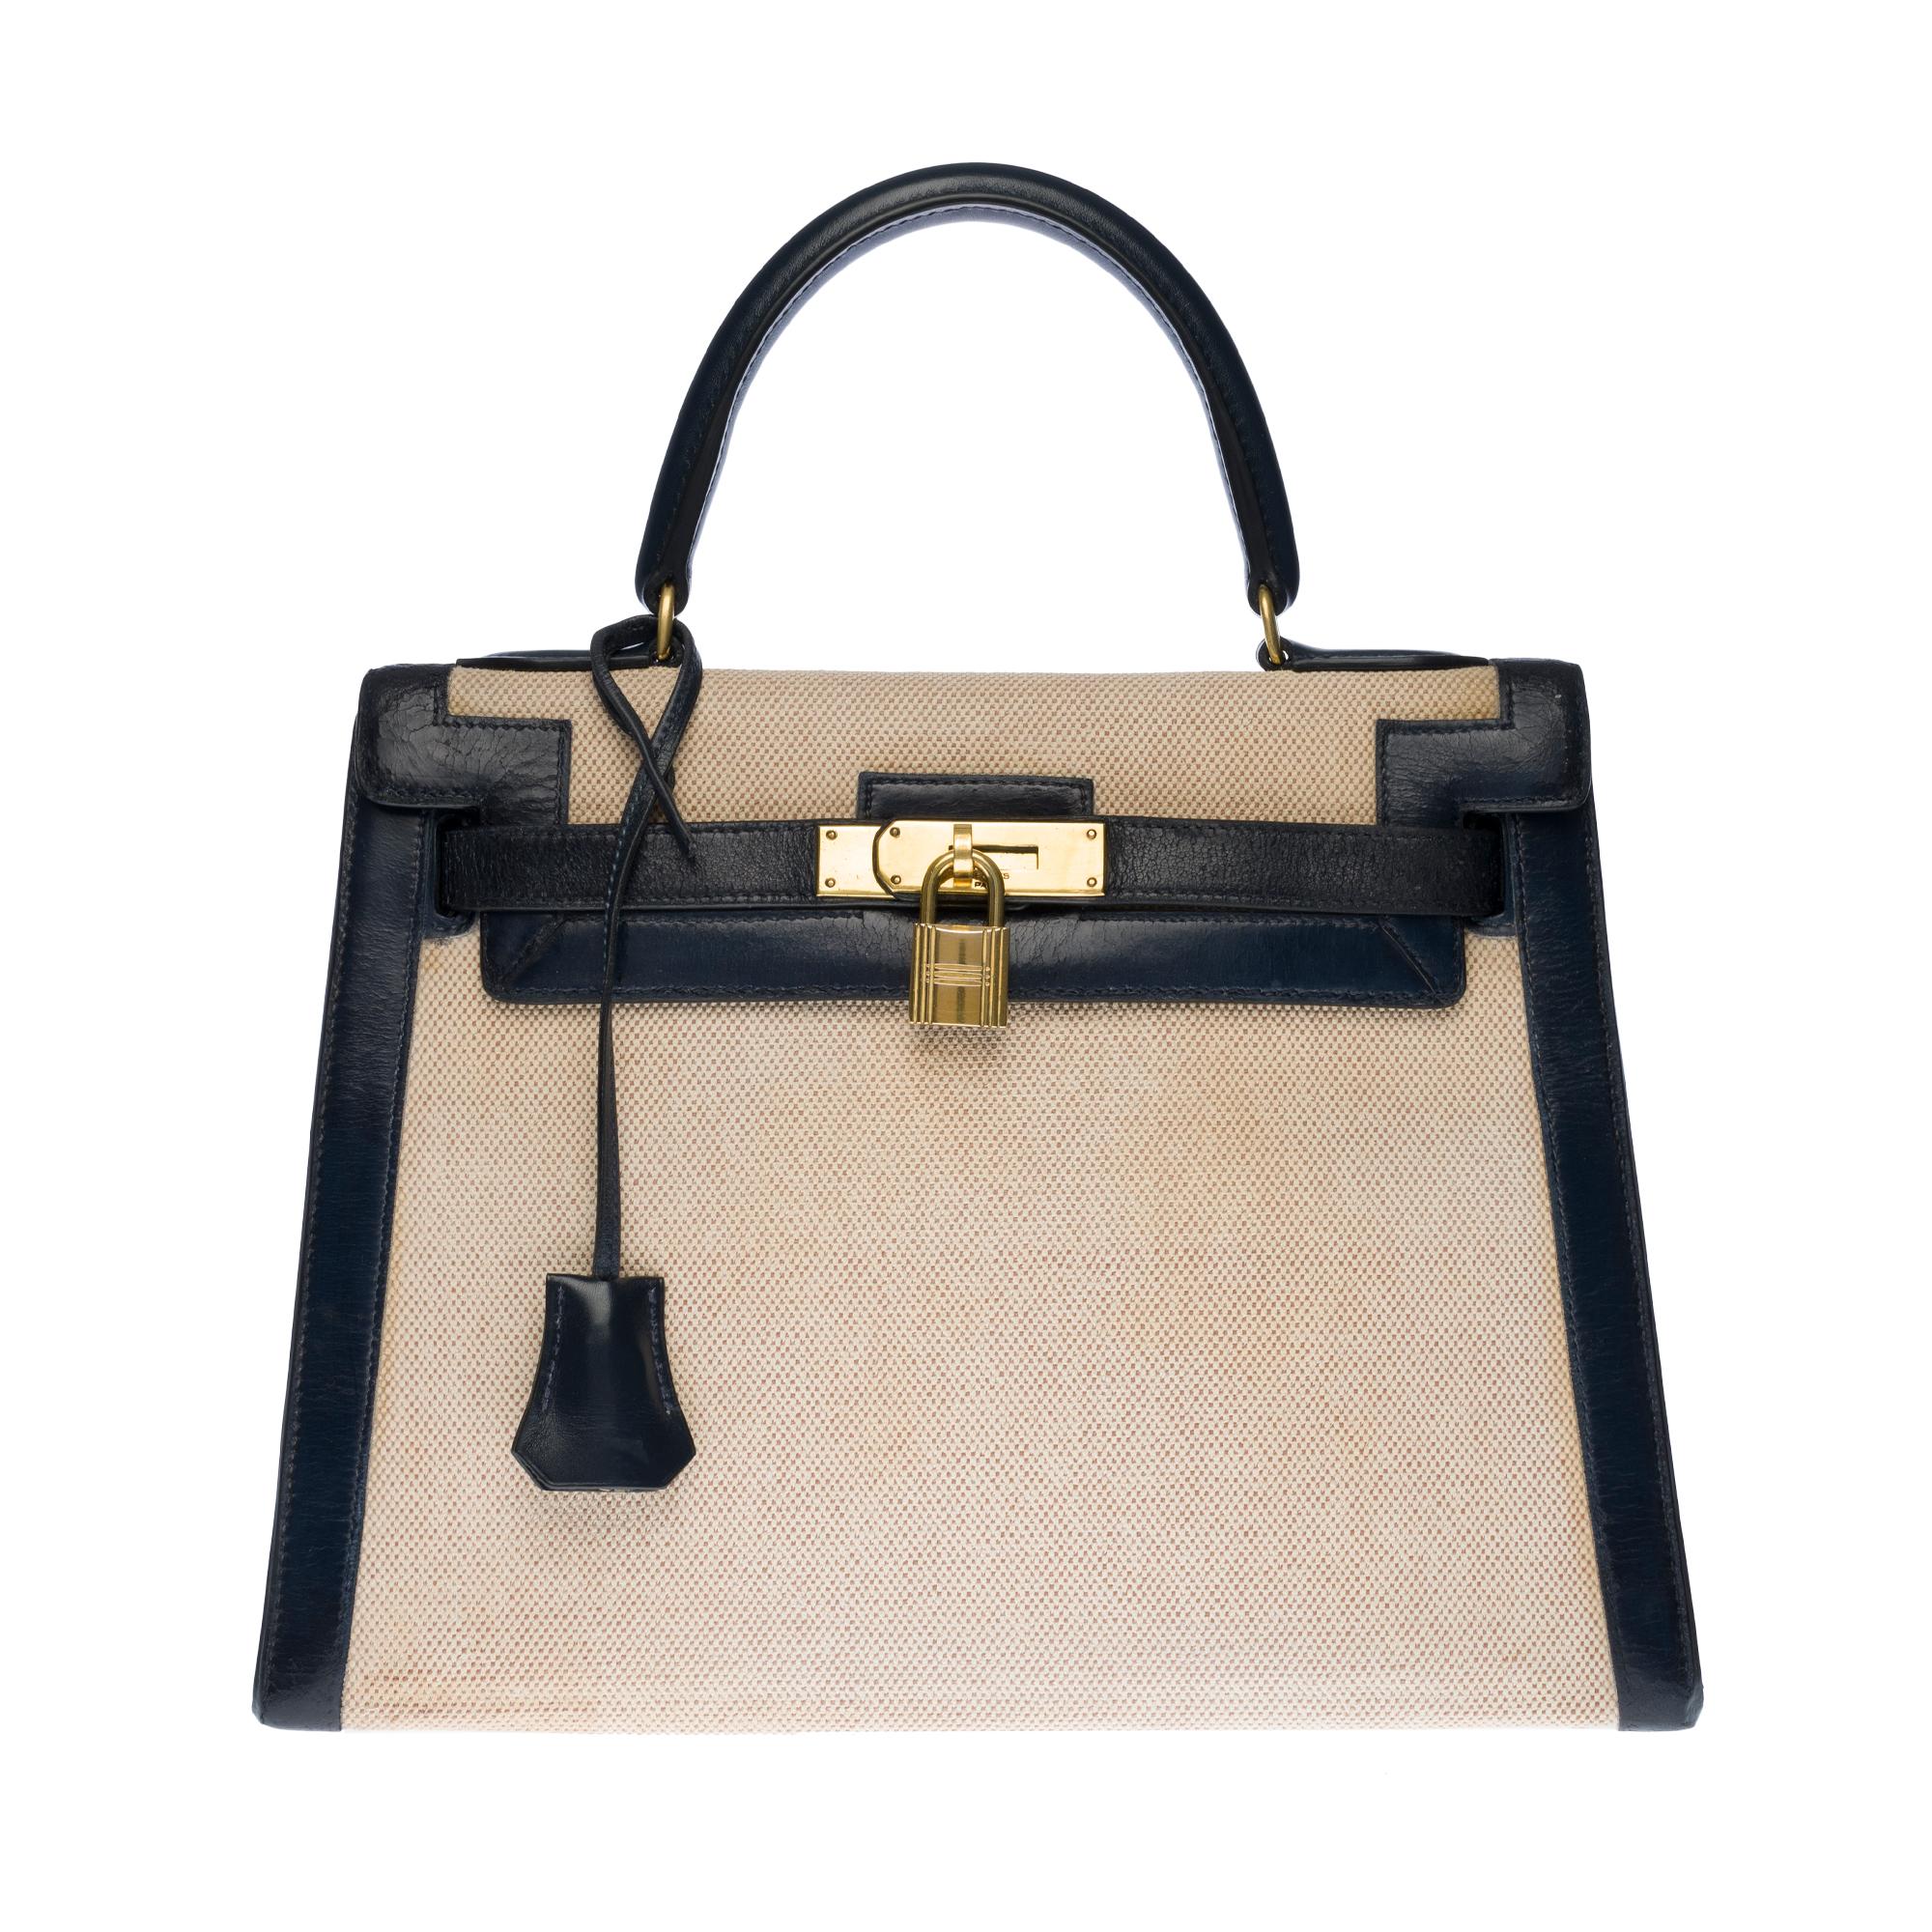 Rare Hermes Kelly 28 handbag in navy blue box leather and beige canvas, gold plated metal hardware, handle in navy blue leather allowing a hand support.

Closure by flap.
Lining in navy leather, a large patch pocket, a double patch